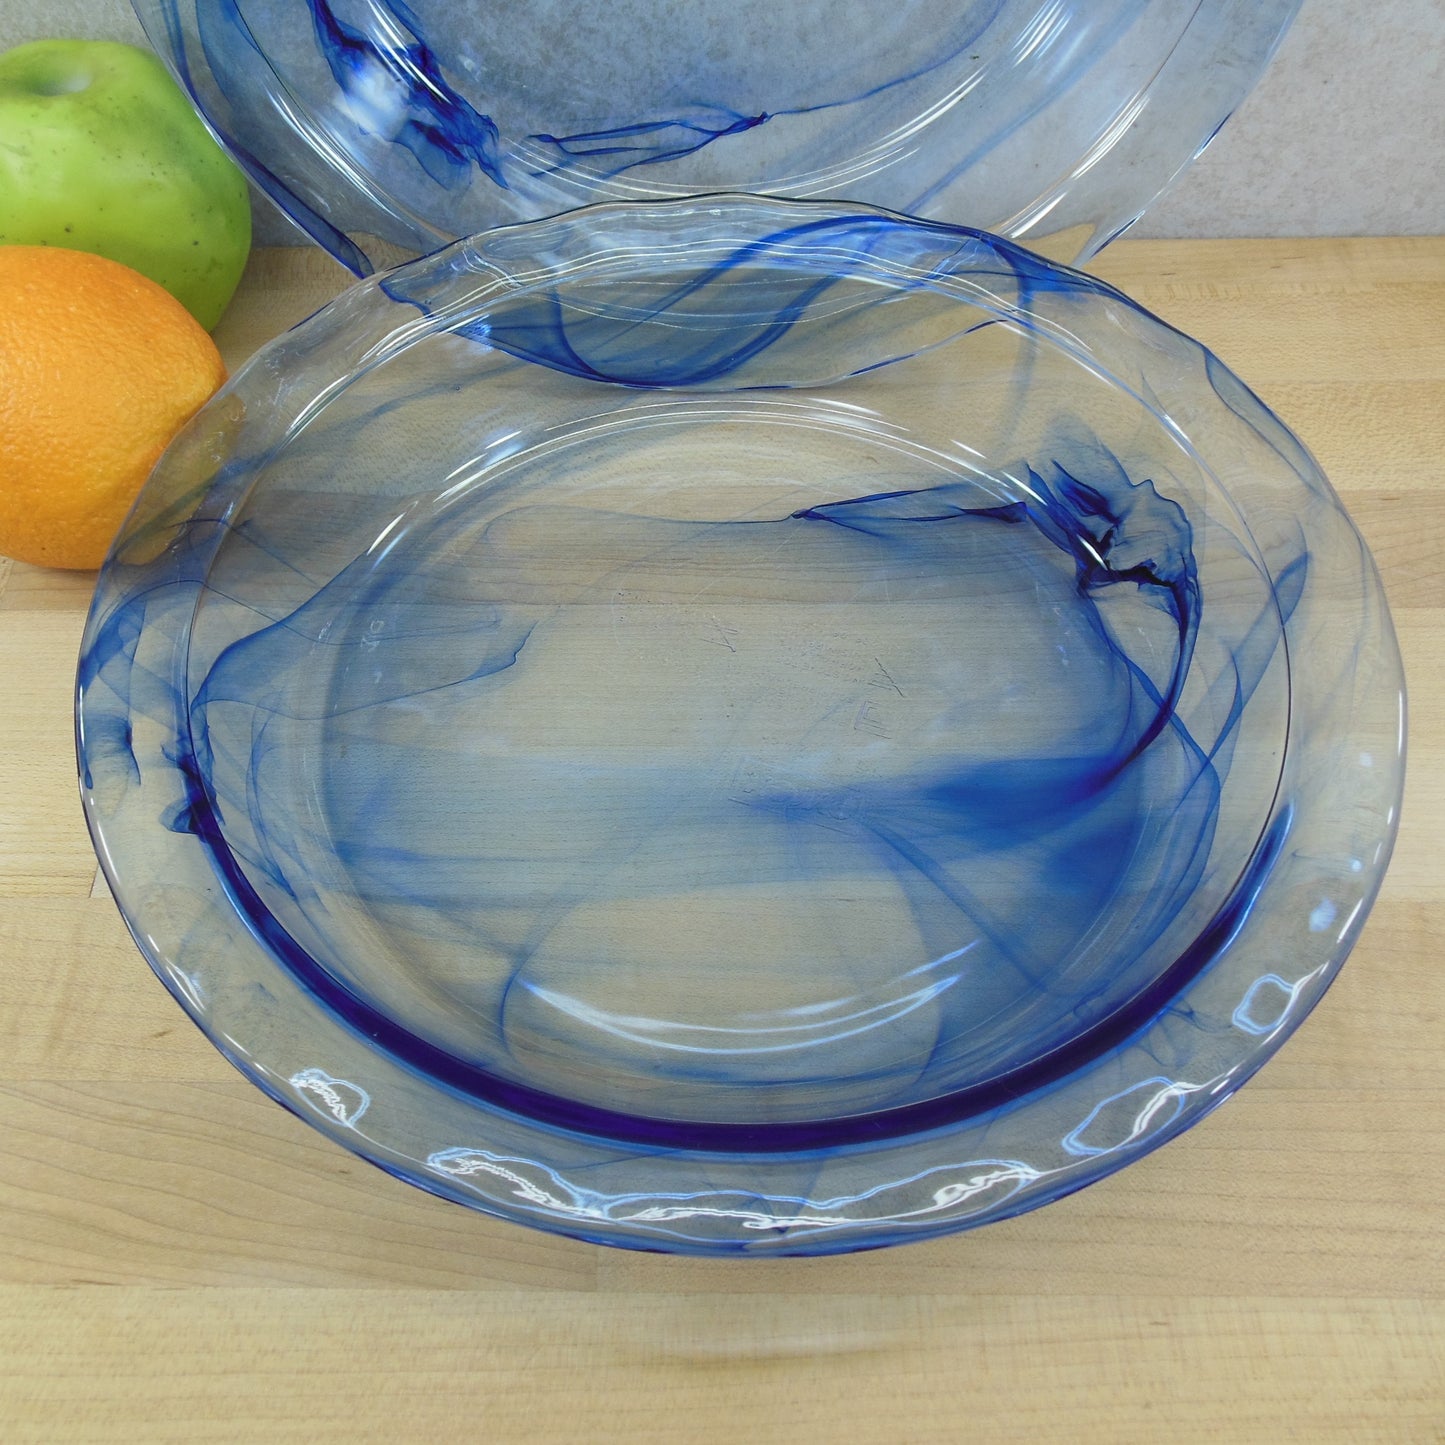 Pyrex USA Glass Pair Swirl Blue Lagoon Pie Plate Dishes 9.5" fluted